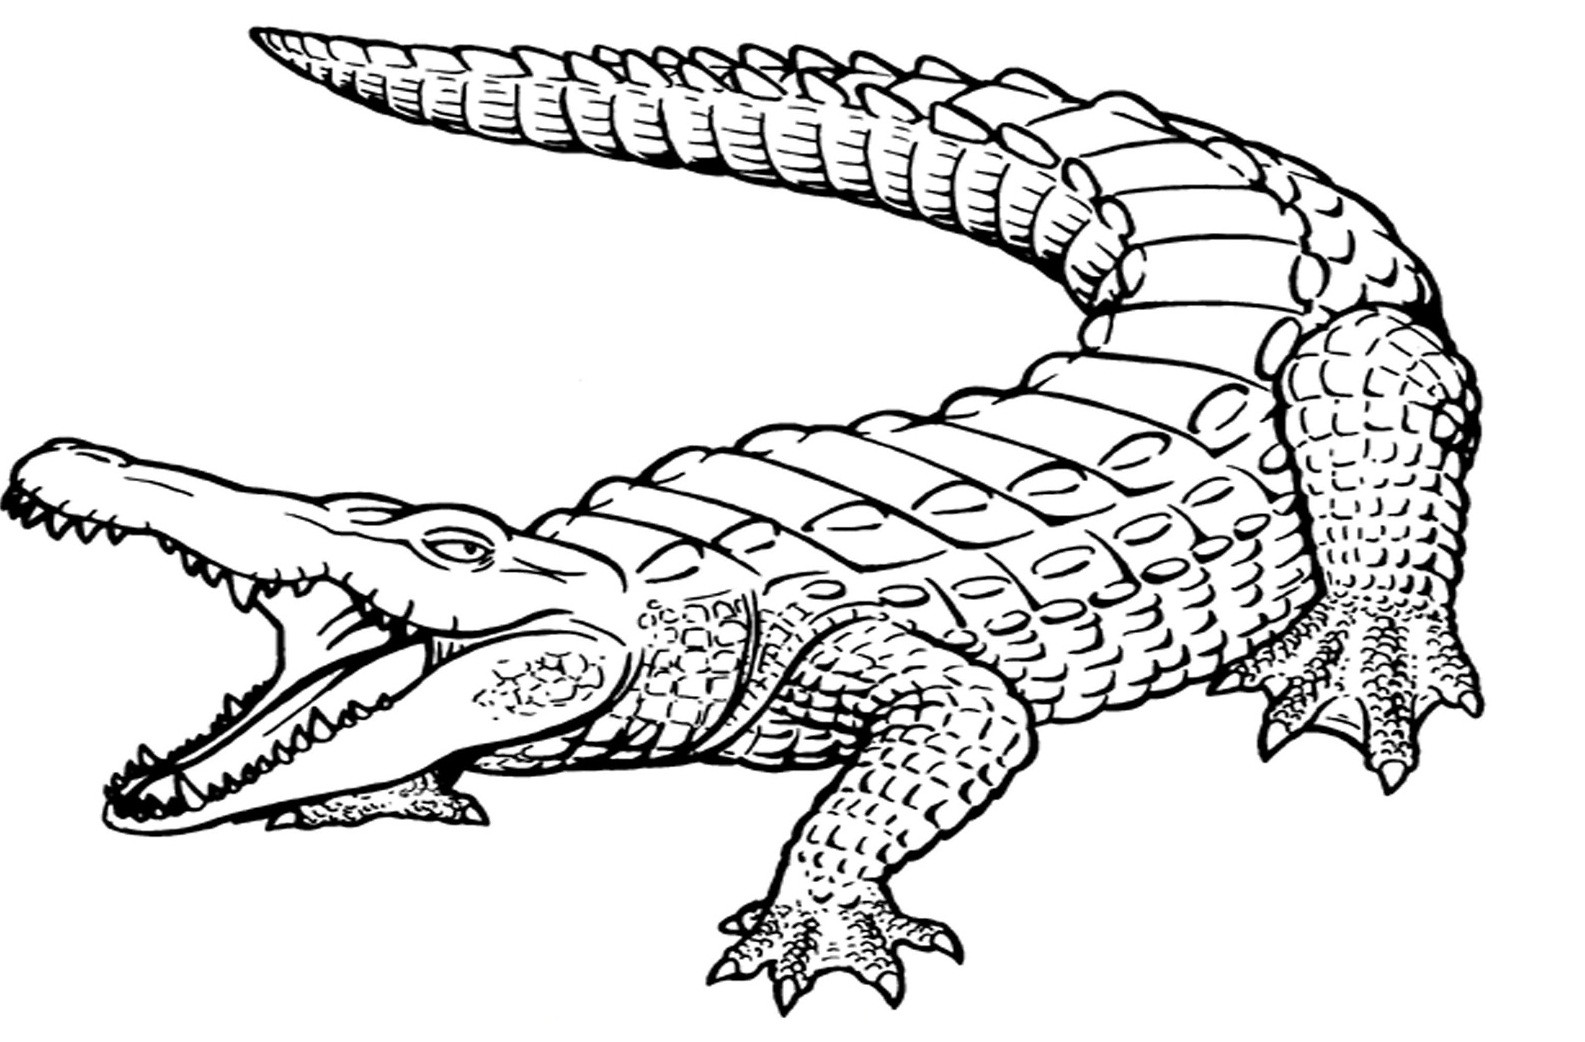 Alligator Coloring Pages
 Crocodile Coloring Pages coloringsuite